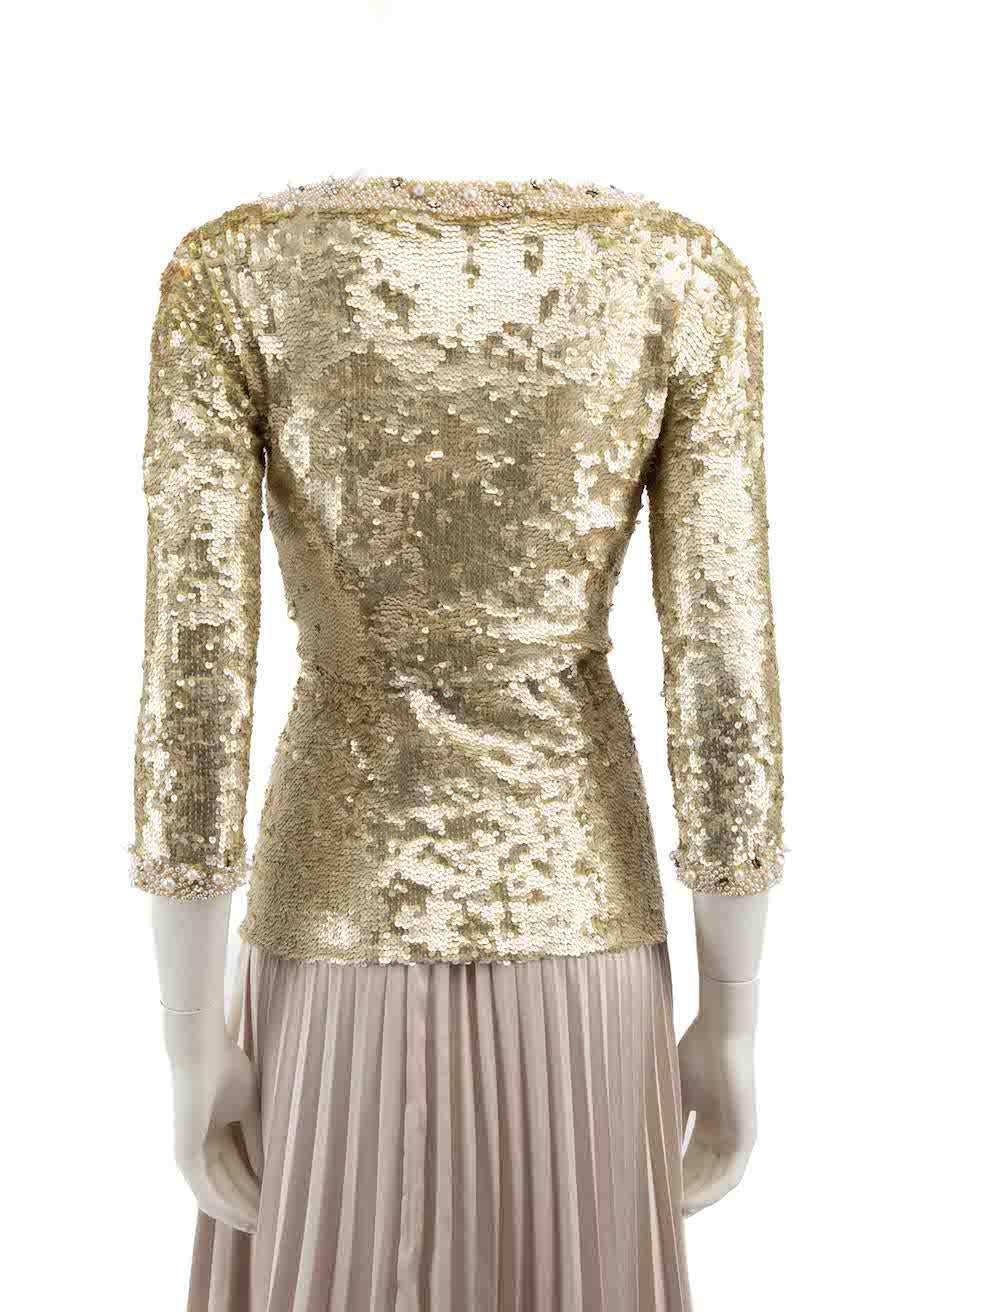 PAROSH Gold Sequinned Cardigan Top Matching Set Size S In Good Condition For Sale In London, GB